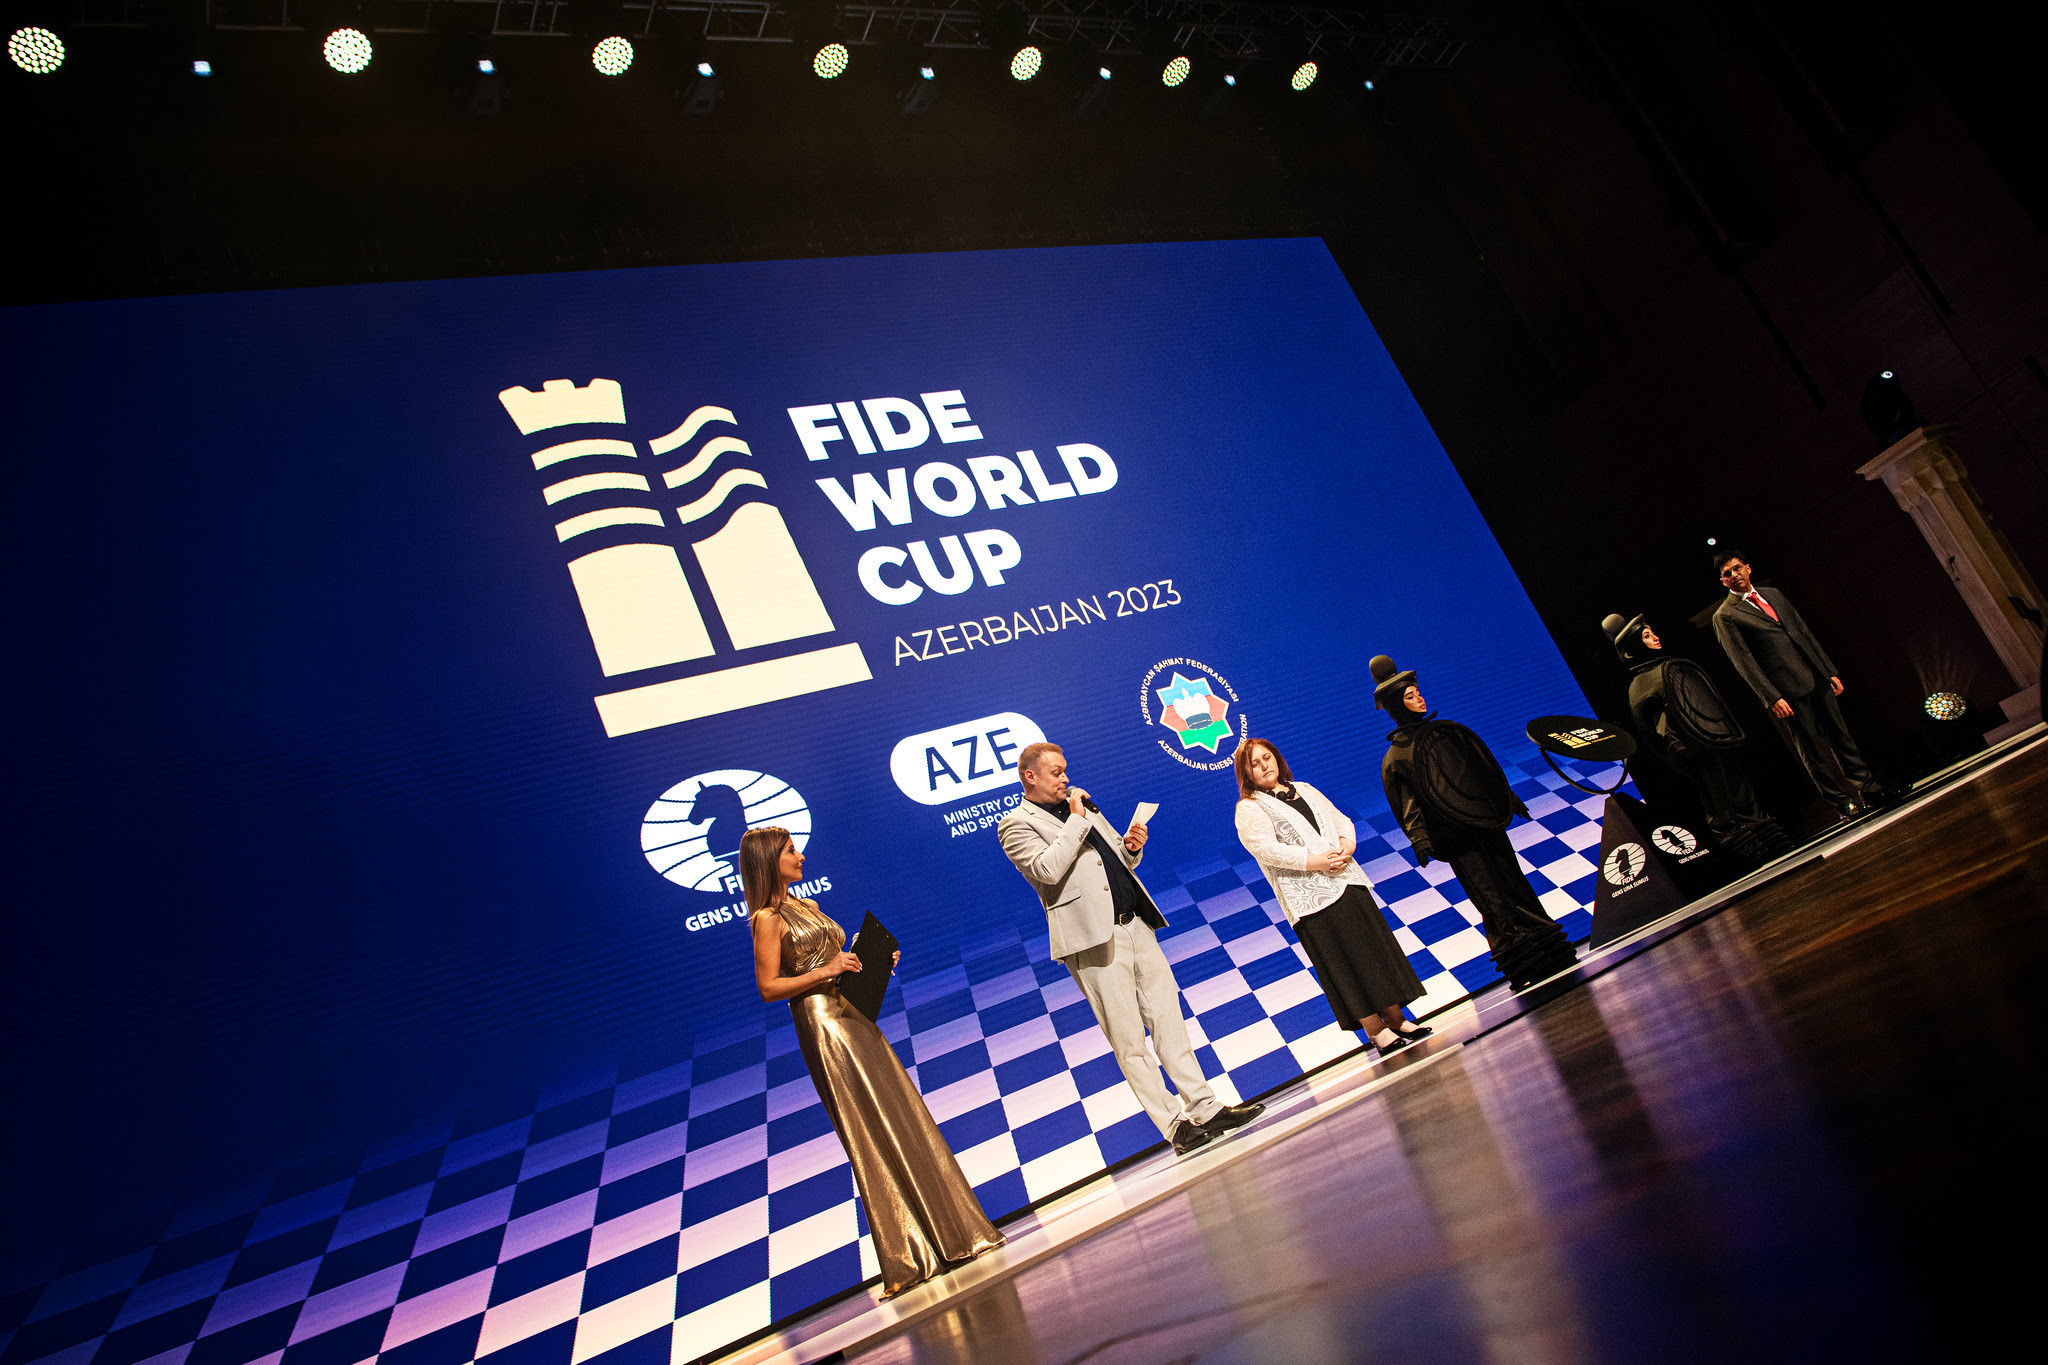 The official opening of the FIDE World Cup was held in the main auditorium of the Baku Convention Center ©FIDE